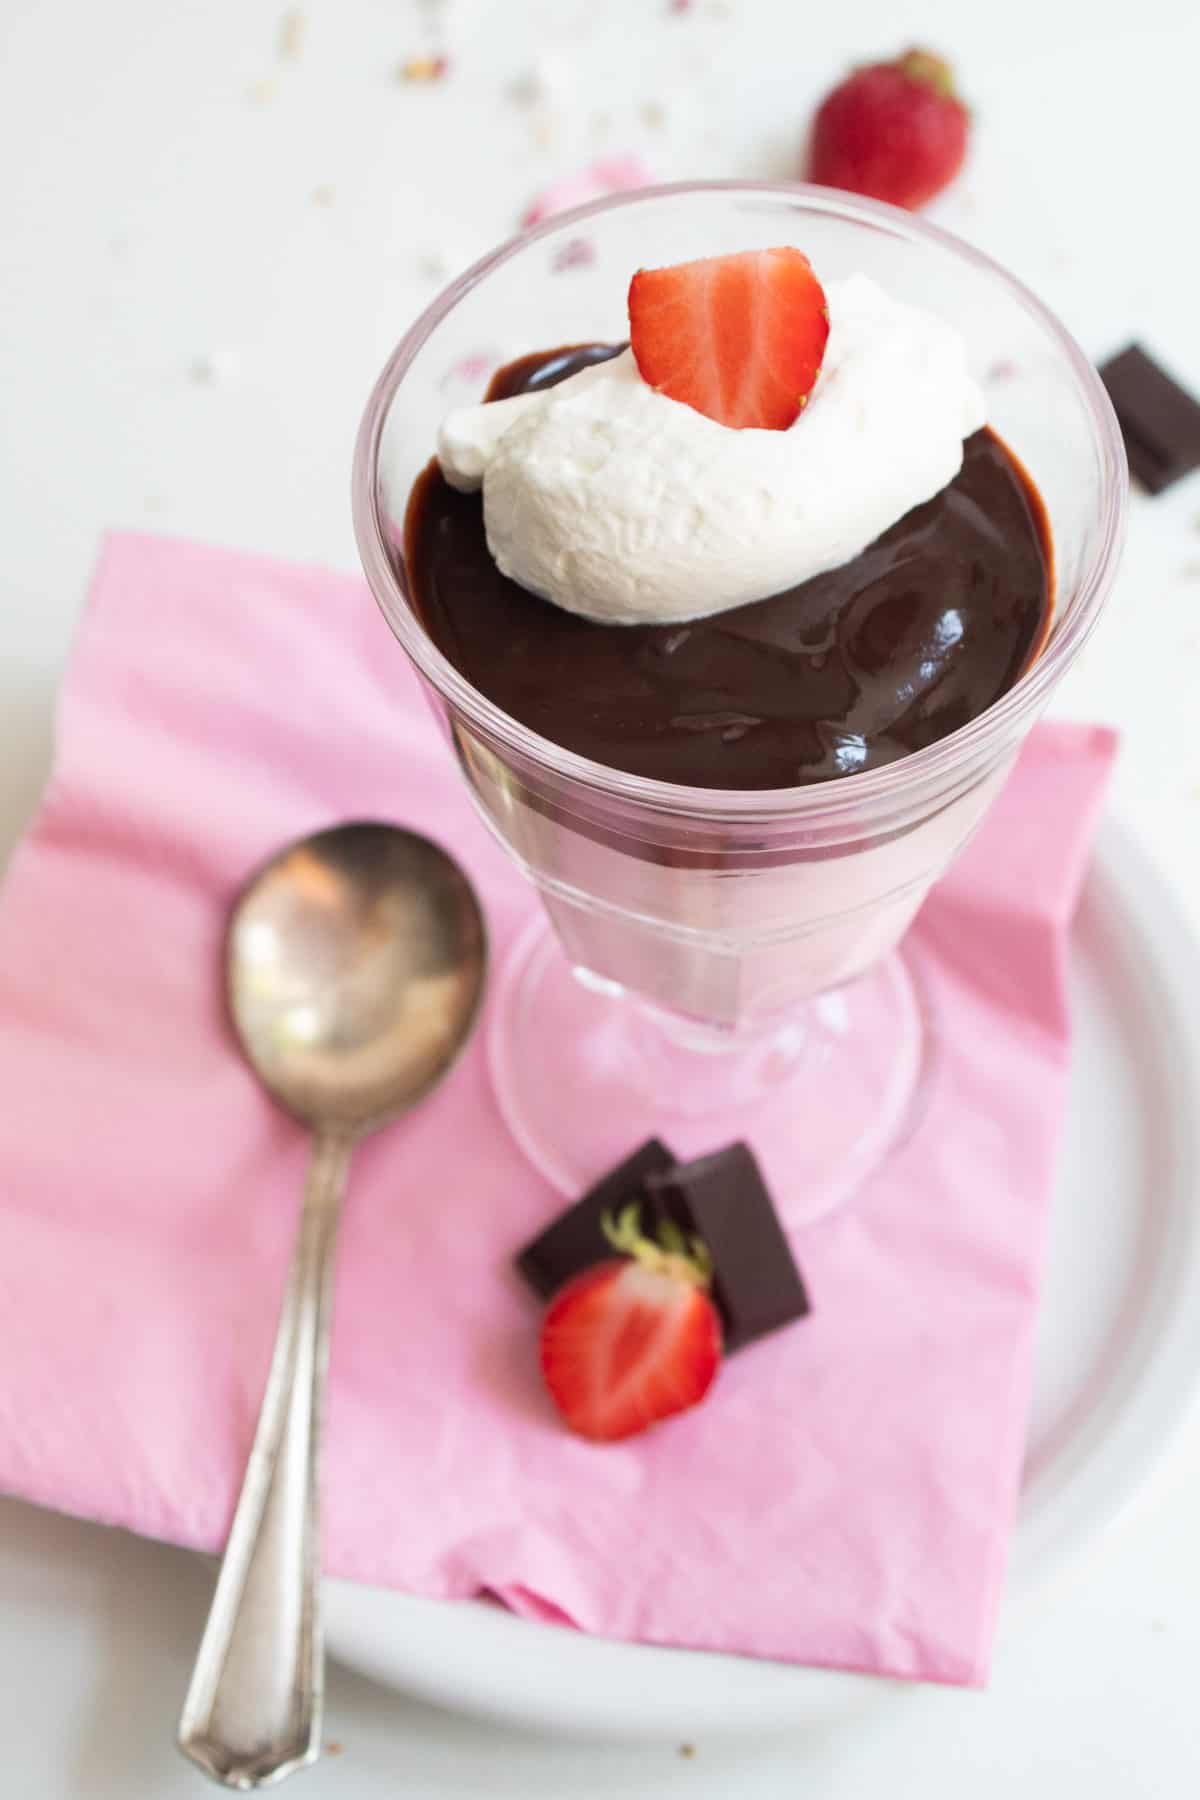 A footed serving glass is filled with a layer of pink mousse, a layer of dark chocolate, and a garnish of whipped cream and a sliced strawberry and sits on a plate lined with a pink napkin.